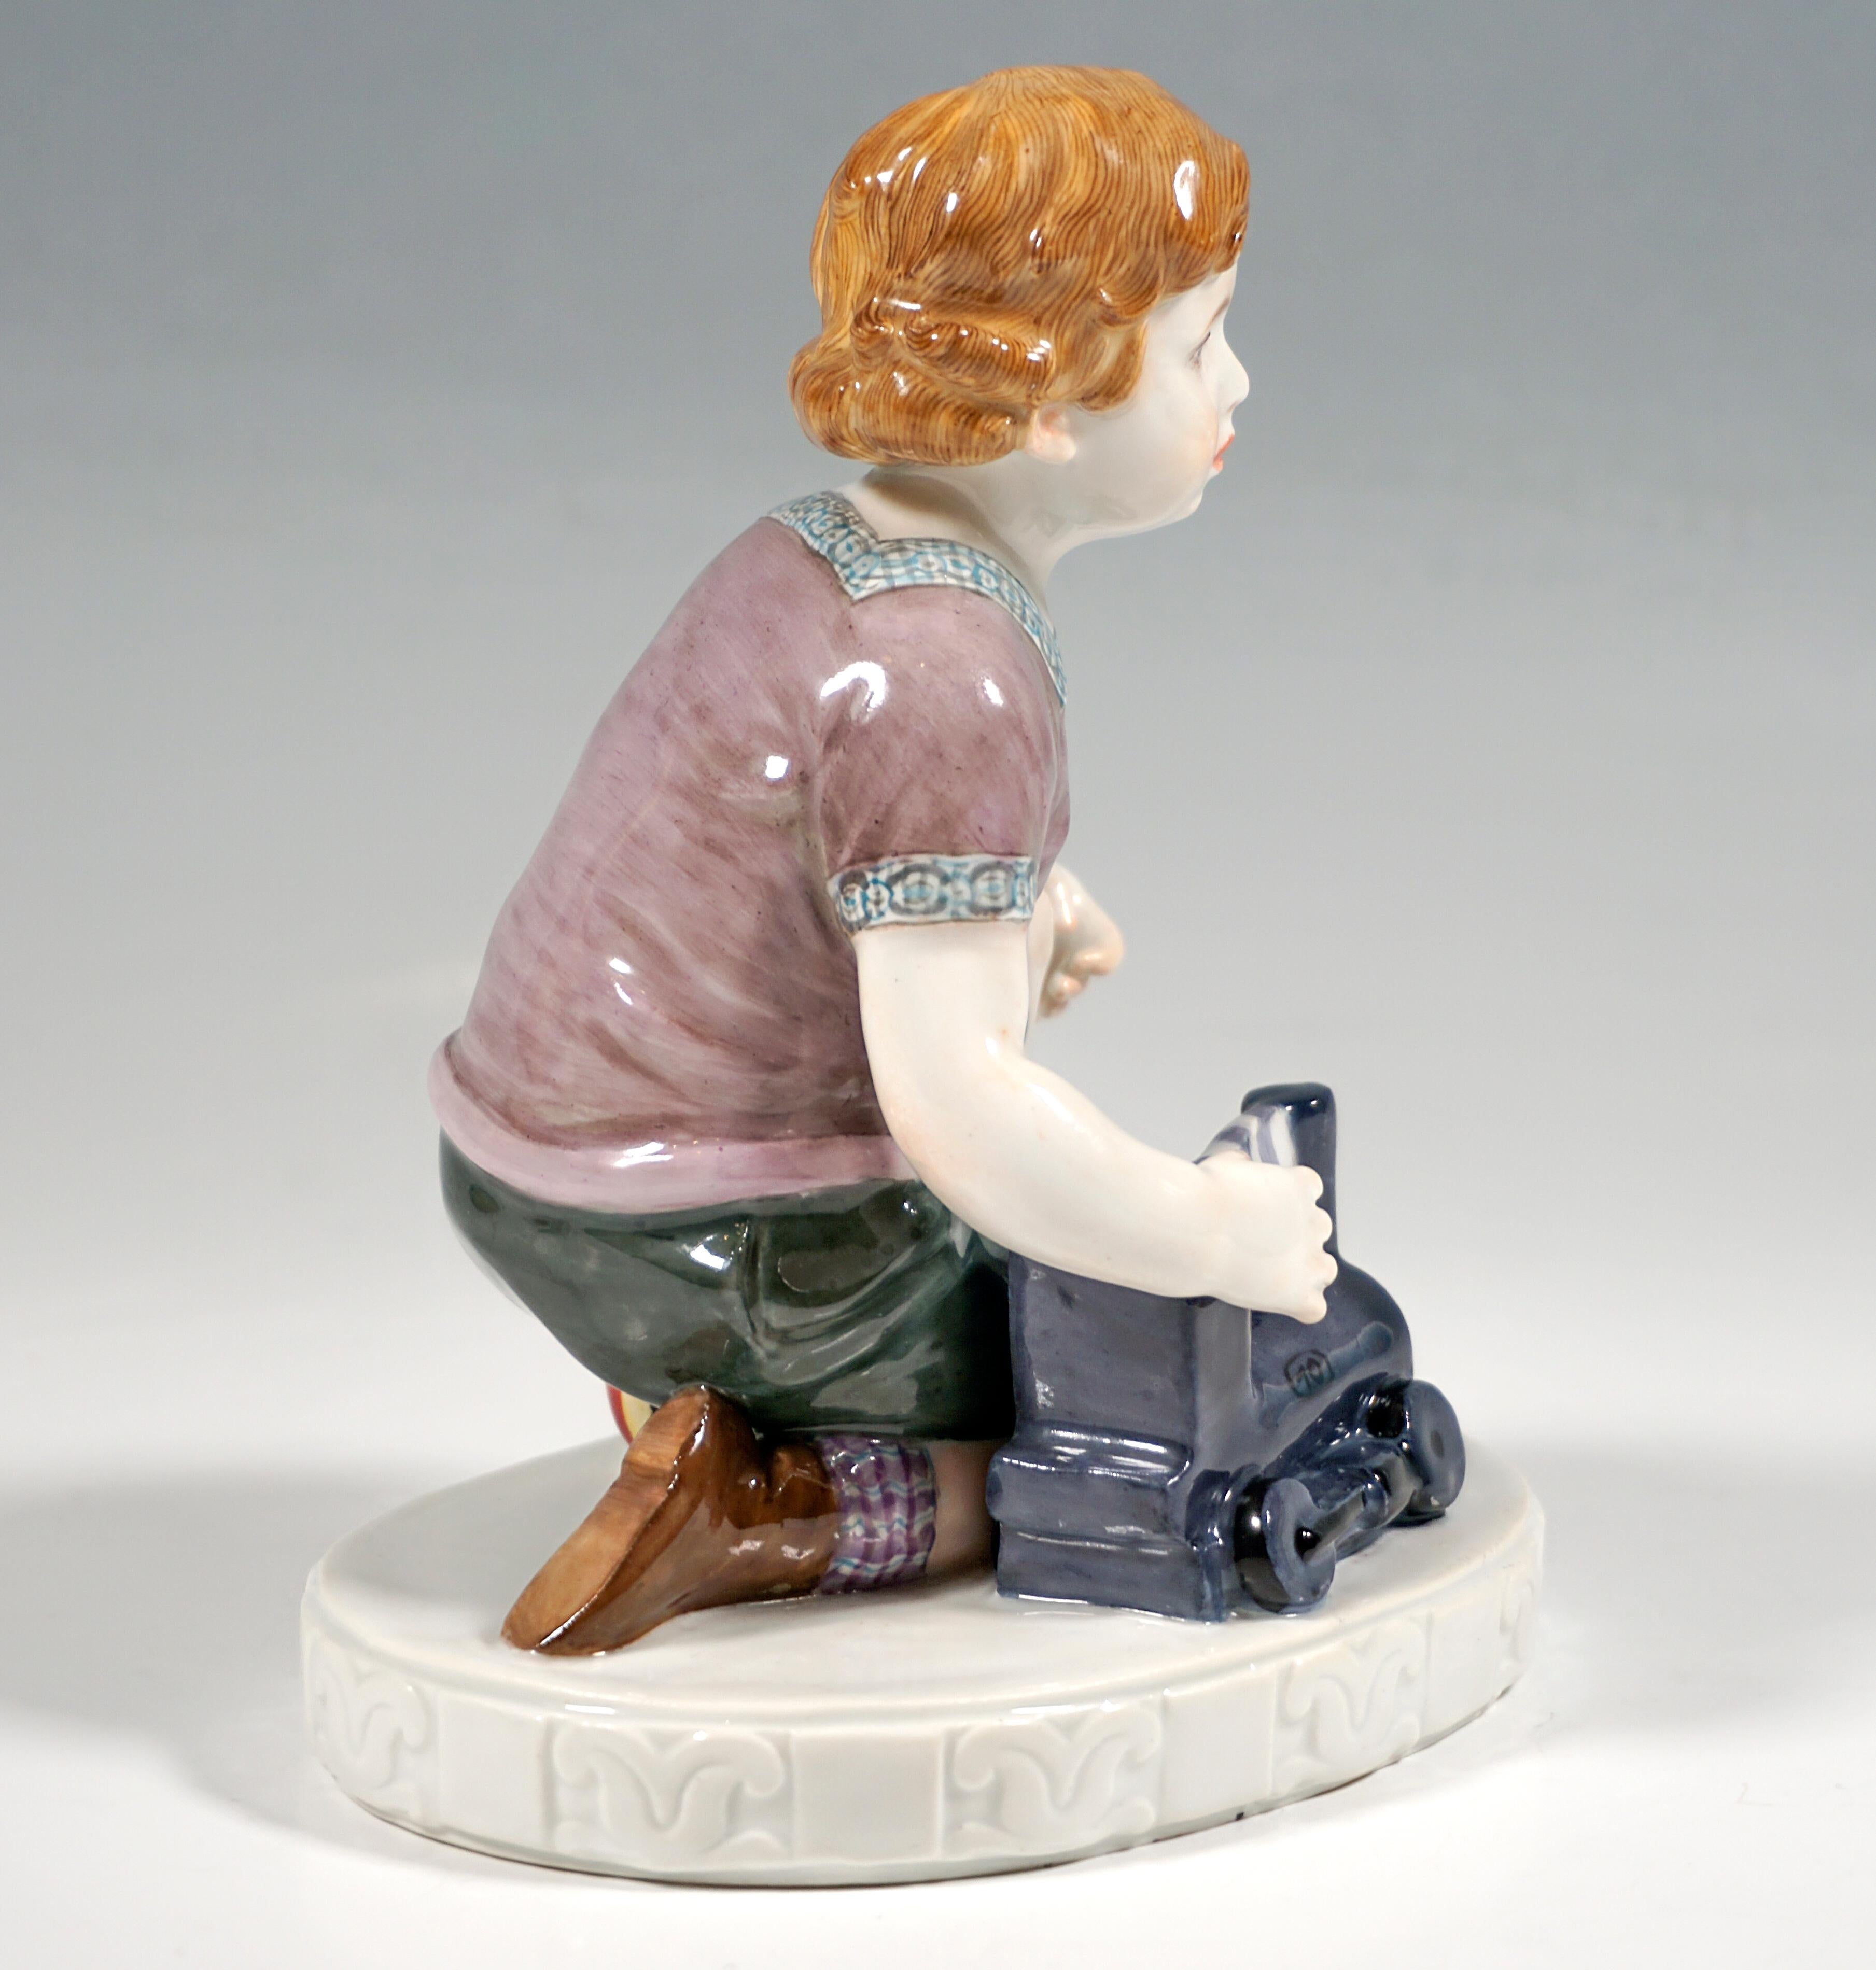 Very rare Meissen porcelain figure:
Boy with curly hair, wearing a short shirt with a square neckline and patterned hems, breeches and high brown shoes with checkered socks, kneeling with his right knee on the ground and reaching for the toy